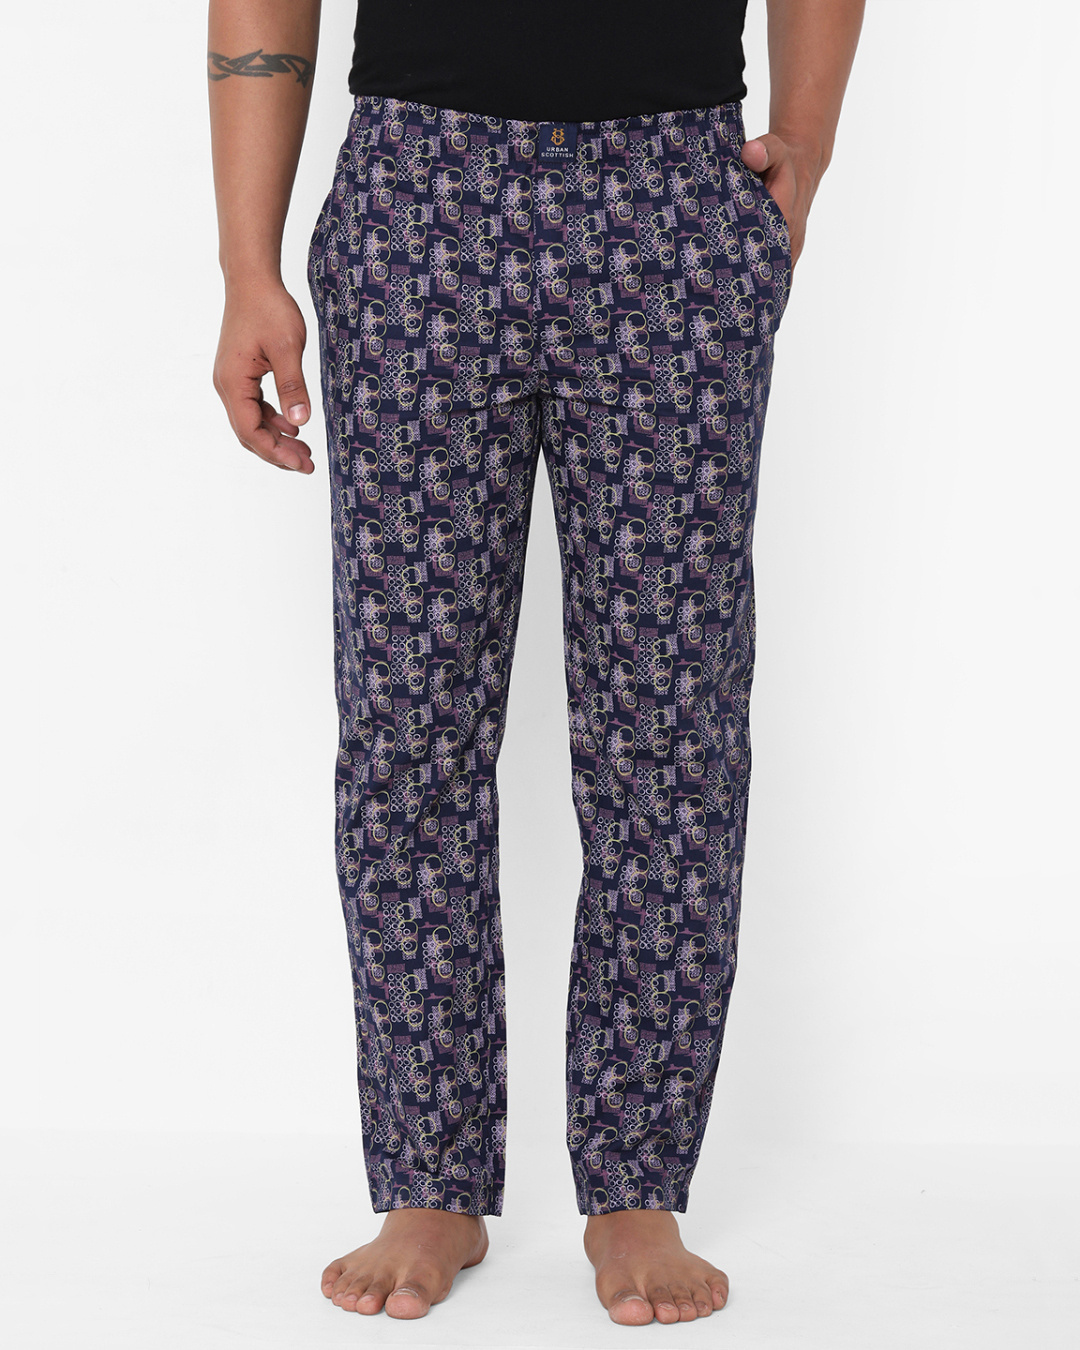 Buy Men's Purple All Over Printed Cotton Lounge Pants Online in India ...